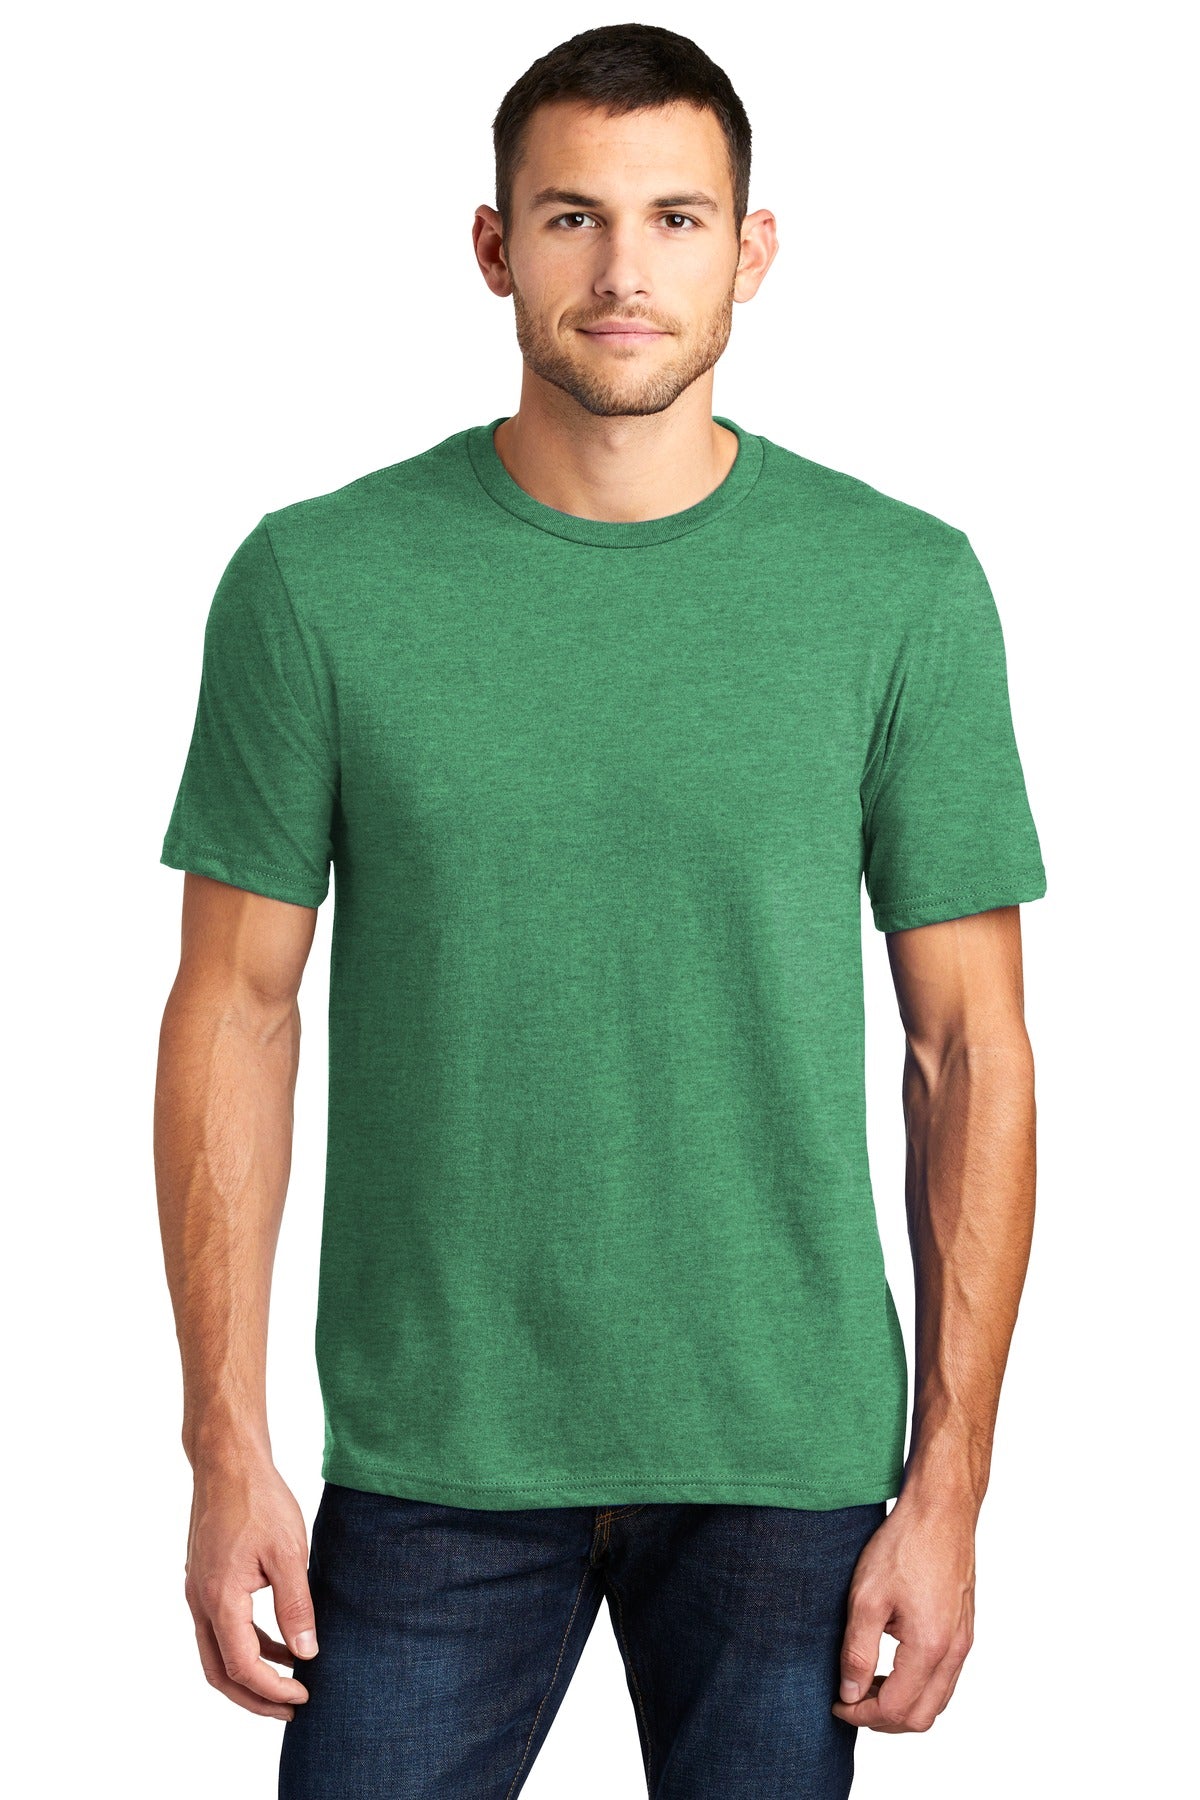 District® Very Important Tee®. DT6000 [Heathered Kelly Green] - DFW Impression